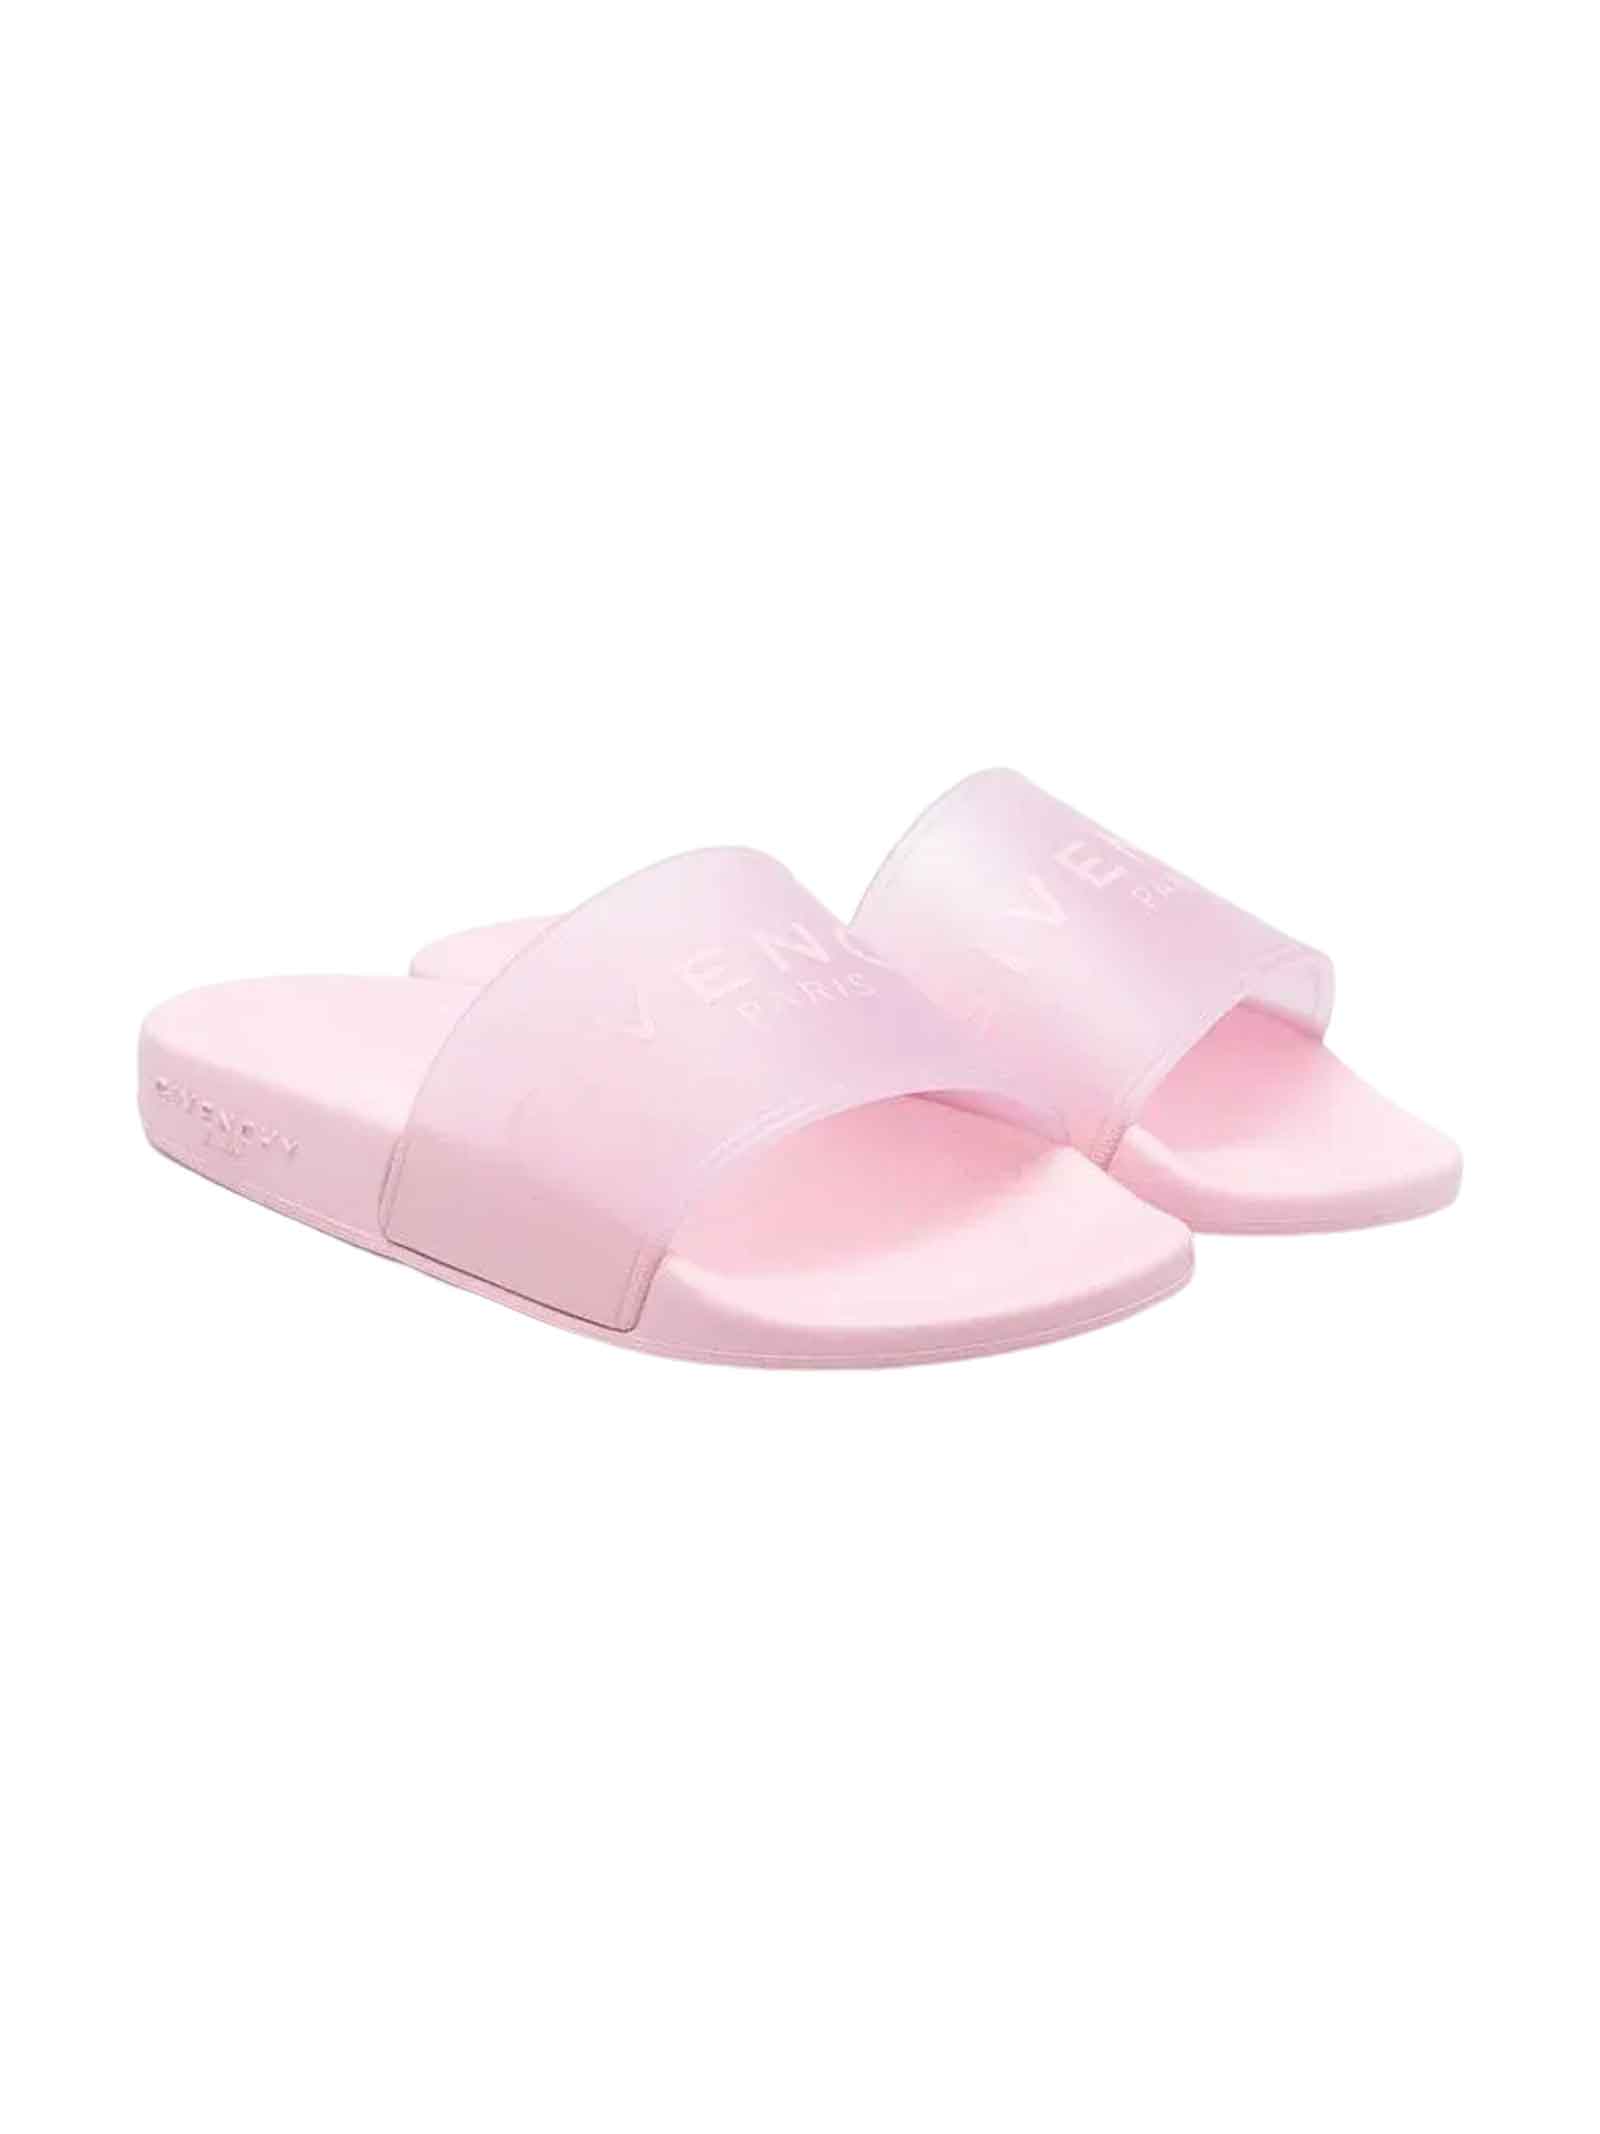 GIVENCHY PINK SLIPPERS GIRL